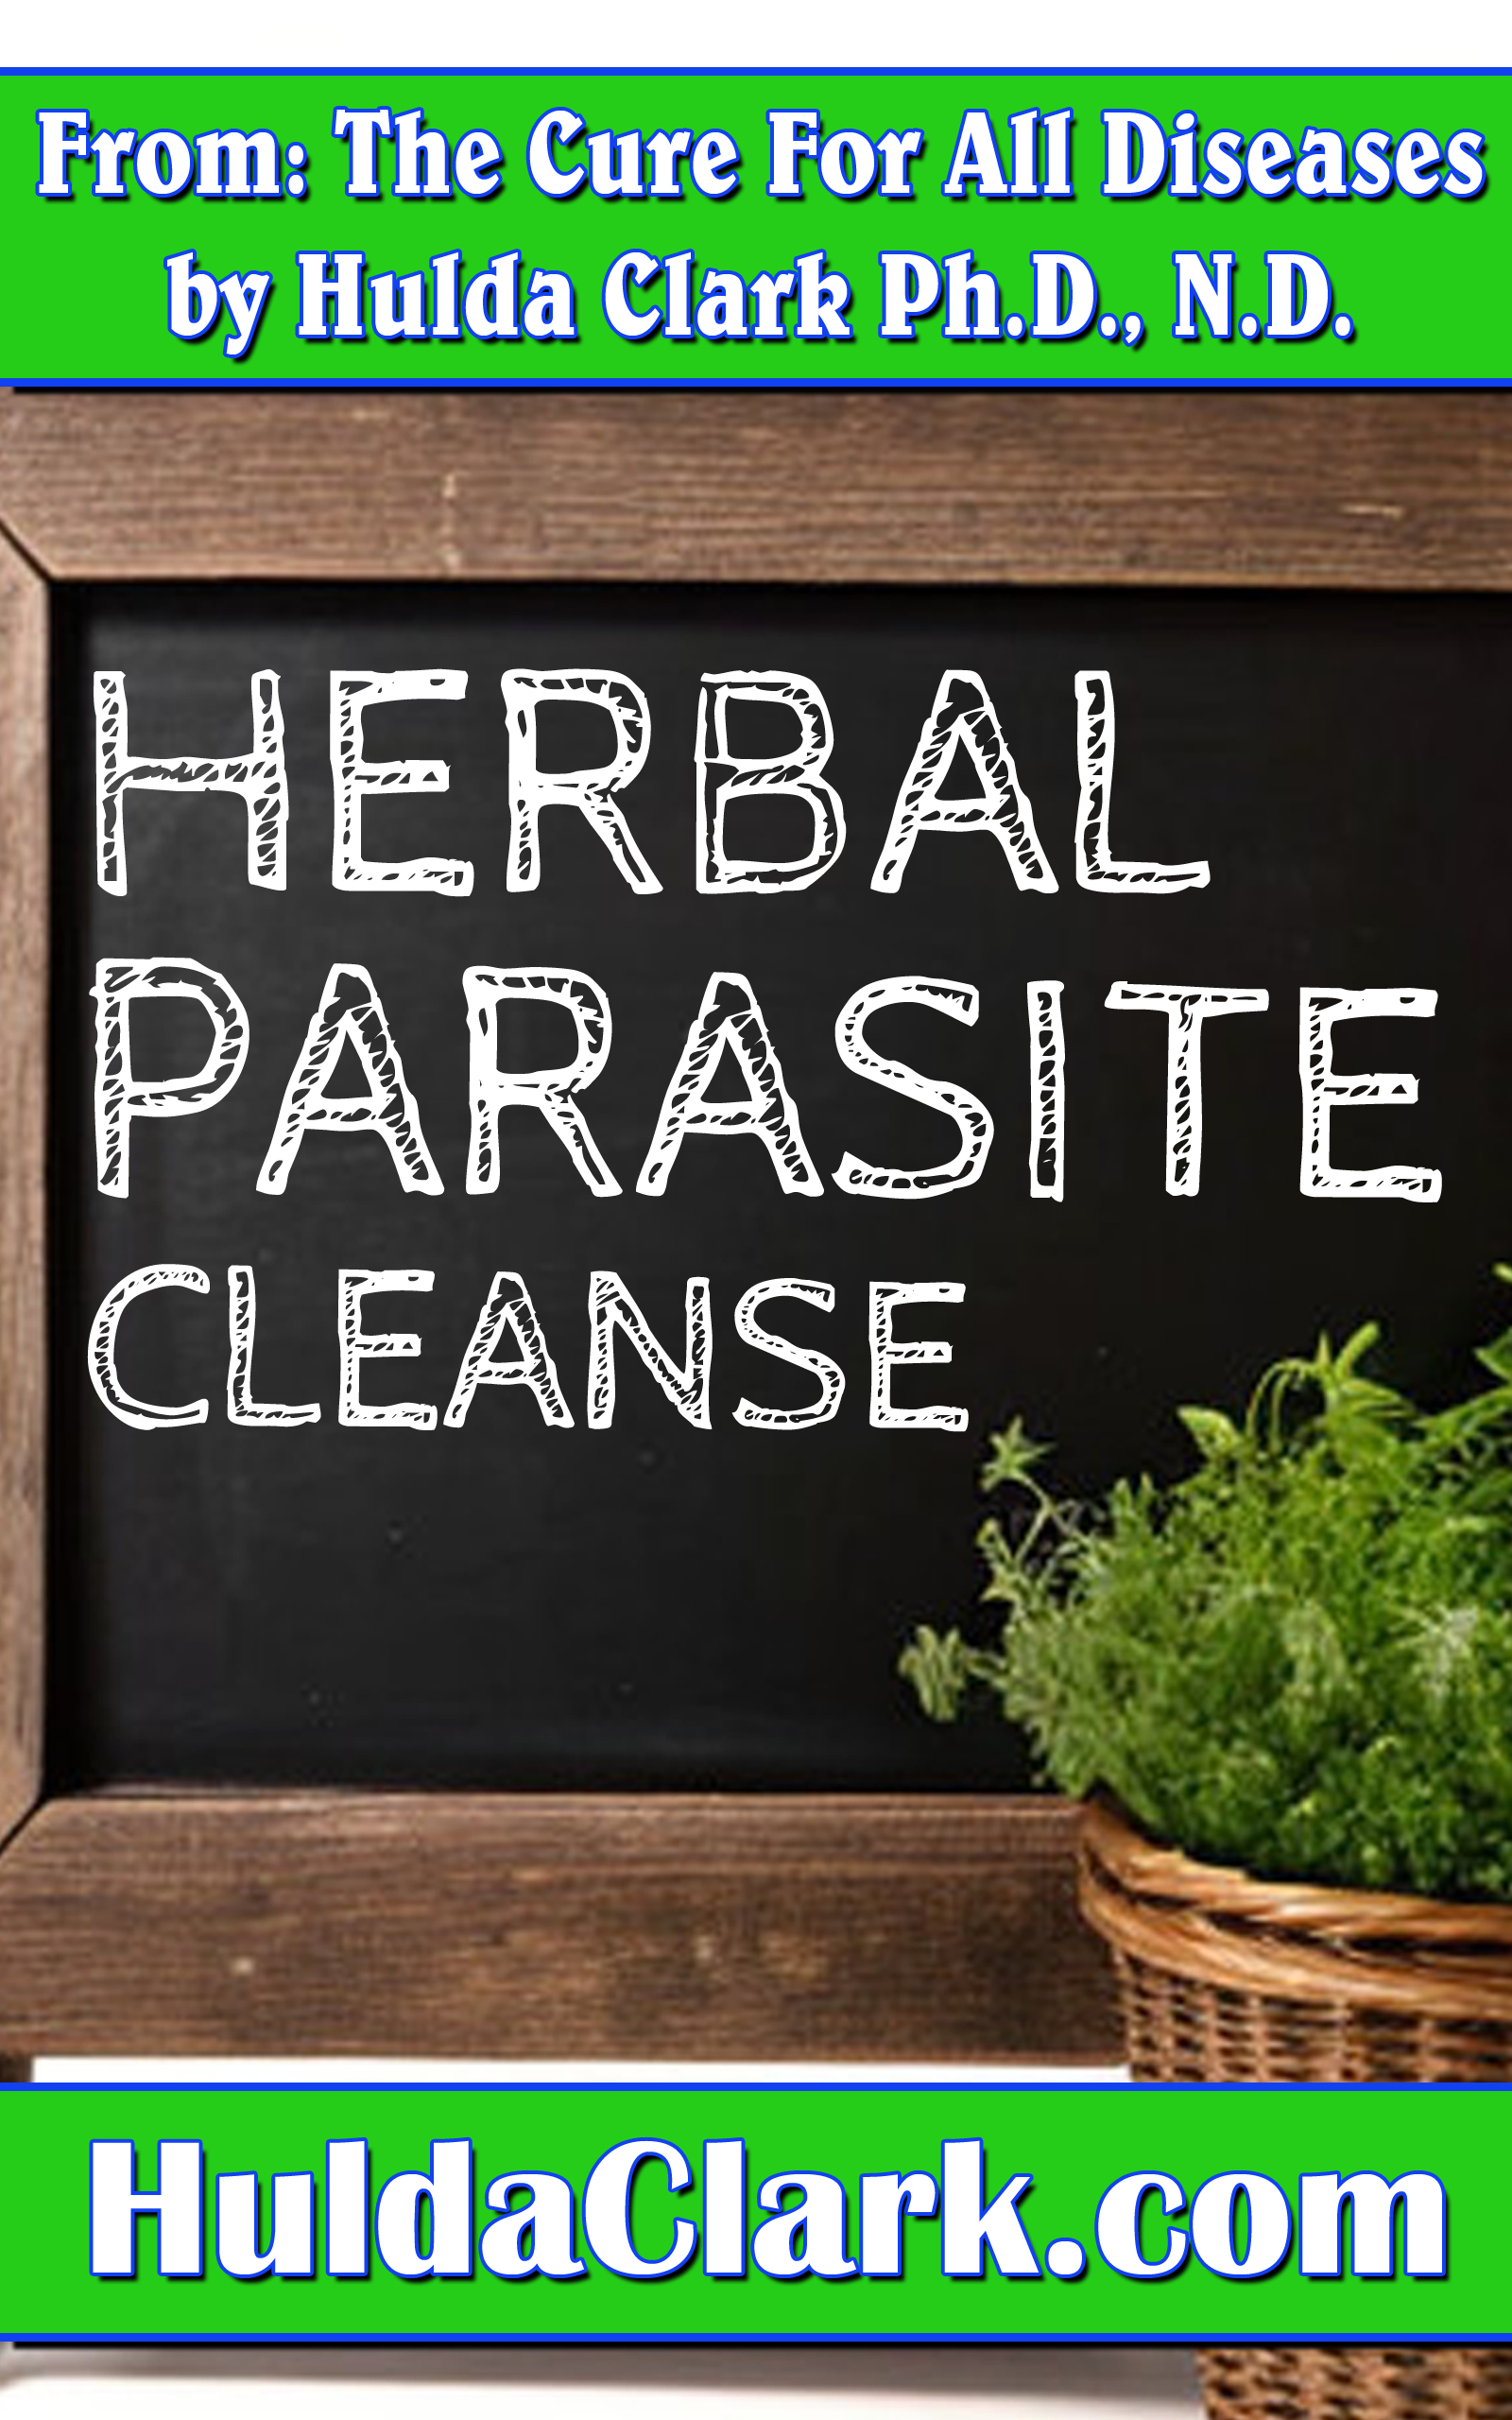 Herbal Parasite Cleanse Ebook excerpt from The Cure for All Diseases by Hulda Clark